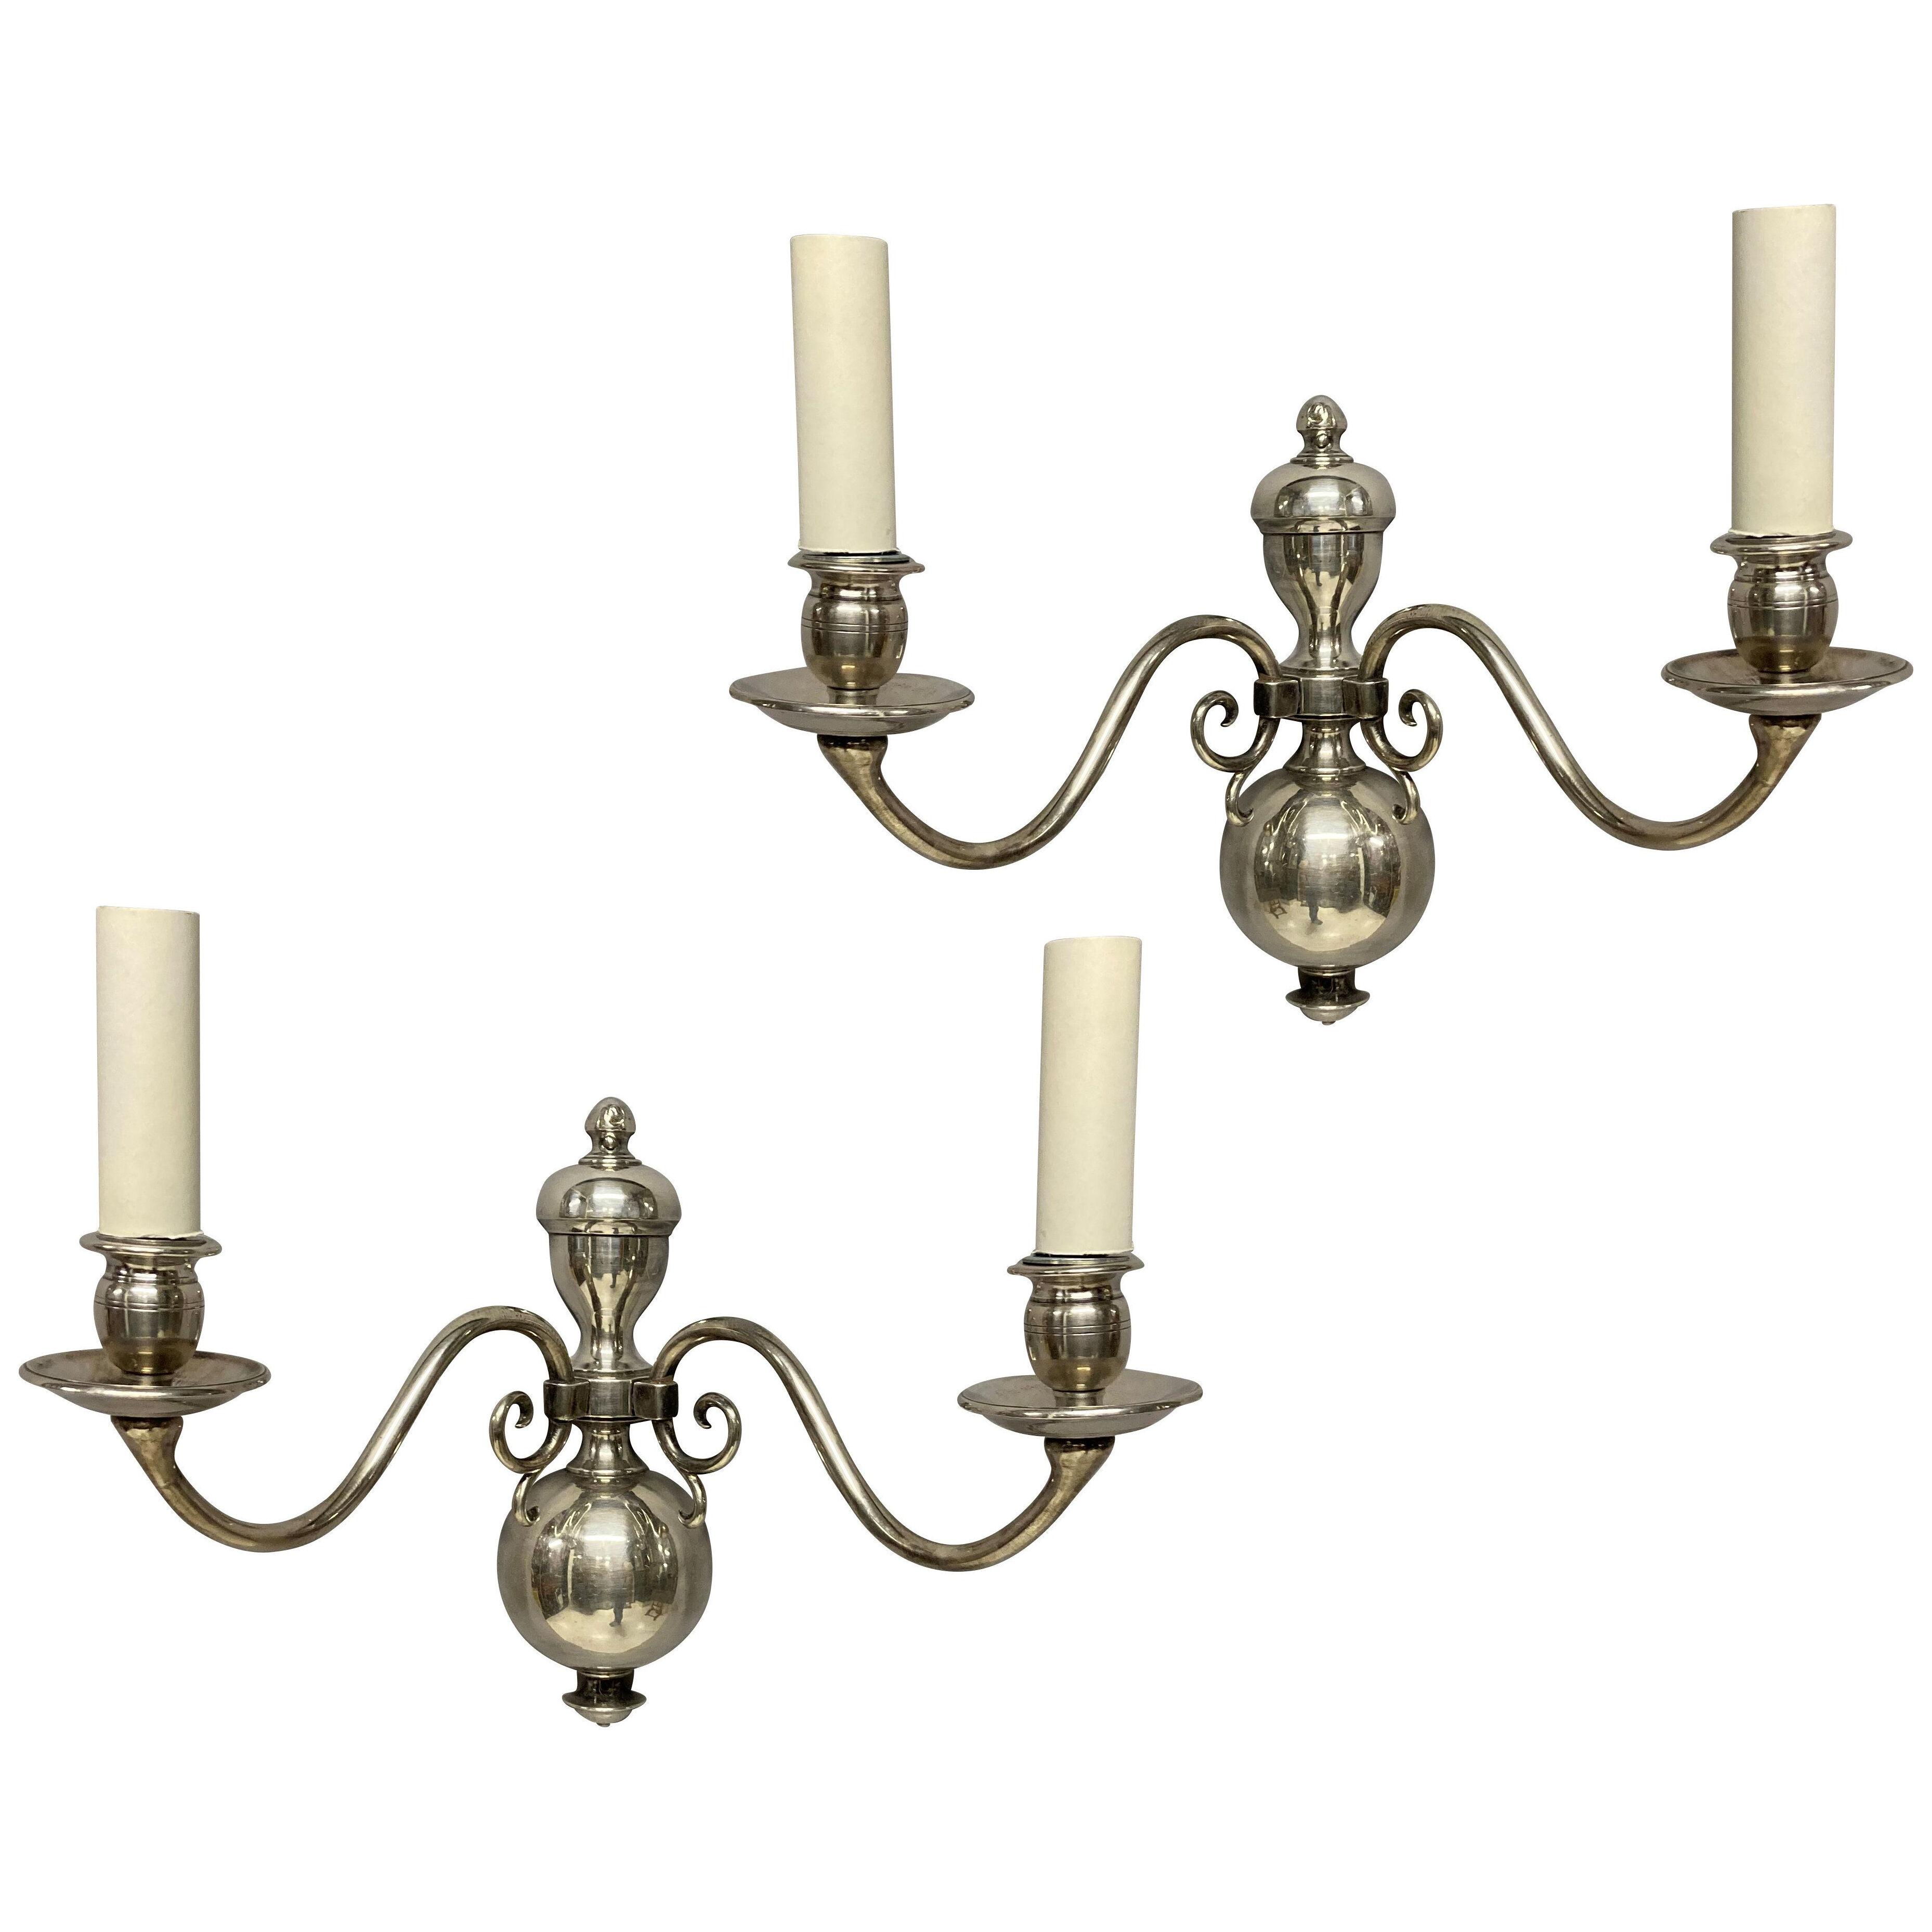 A PAIR OF ENGLISH SILVER PLATED TWIN BRANCH WALL LIGHTS